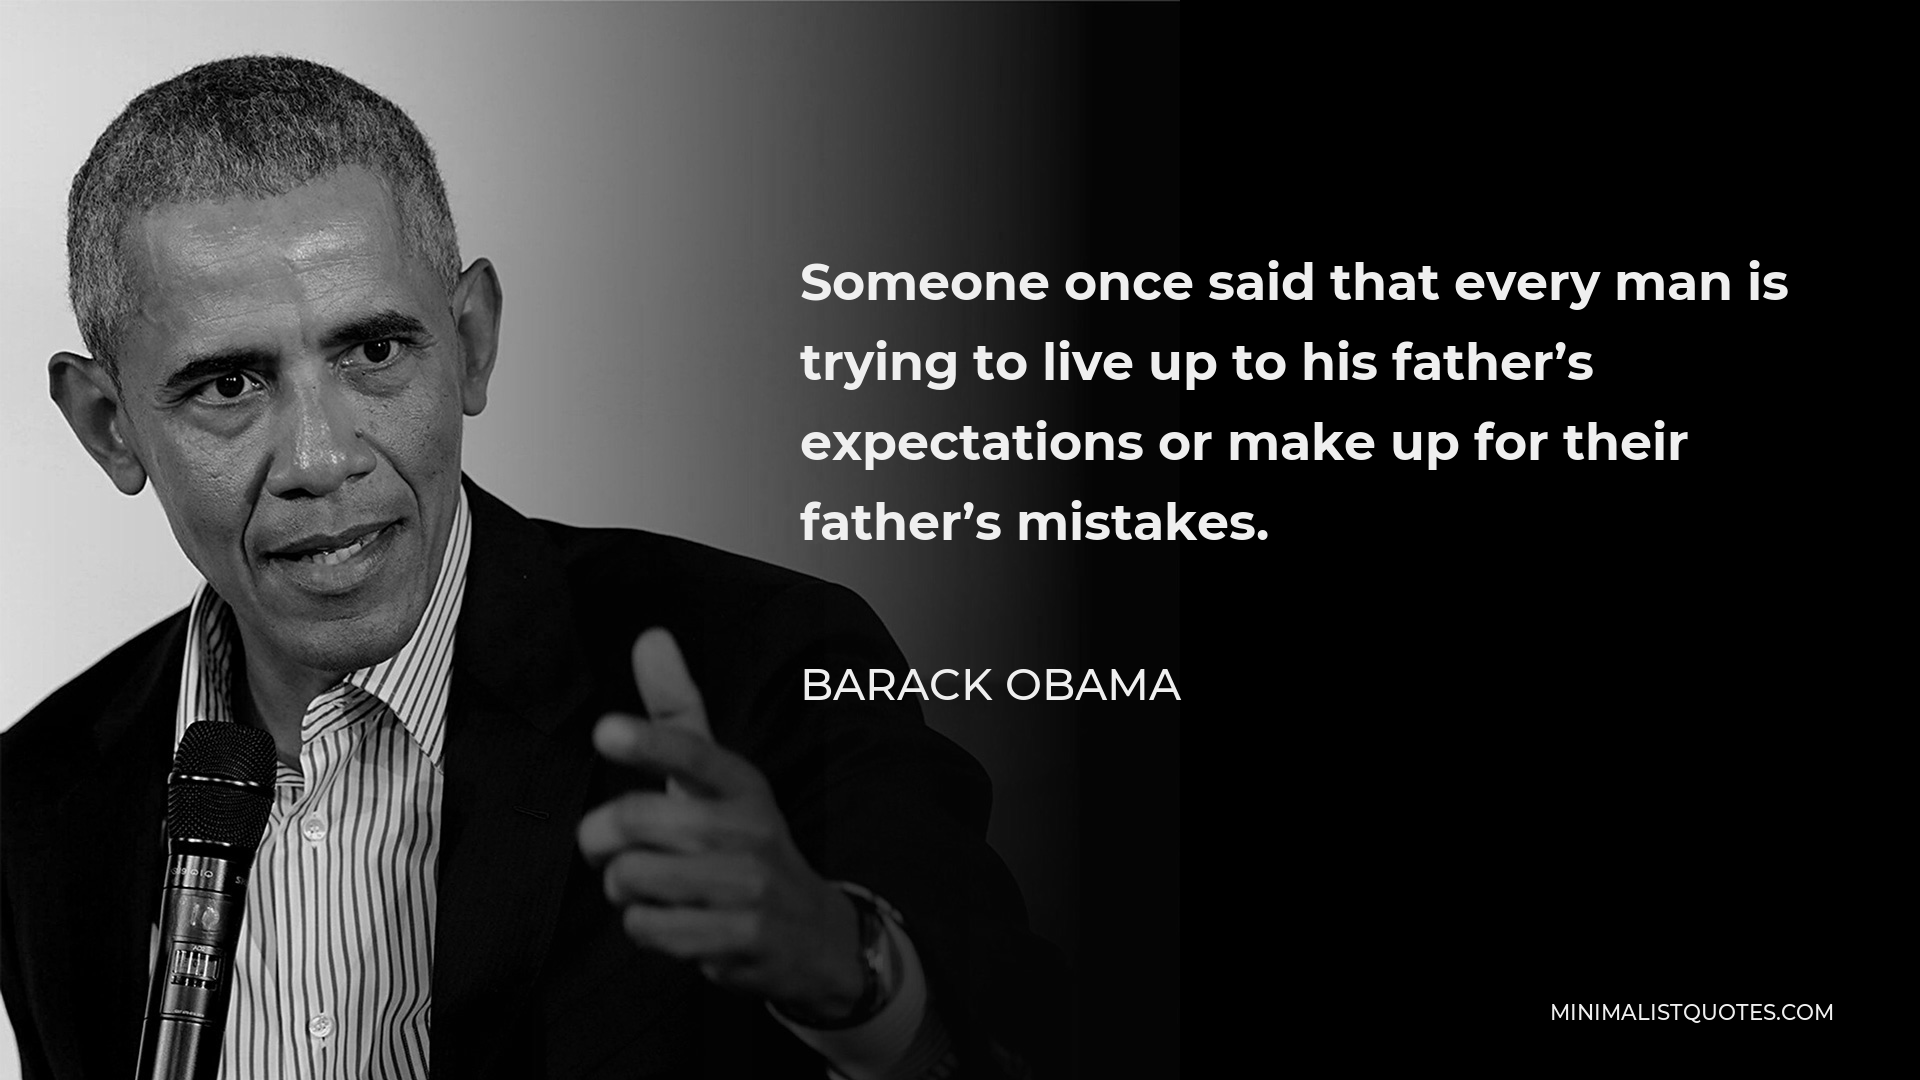 Barack Obama Quote - Someone once said that every man is trying to live up to his father’s expectations or make up for their father’s mistakes.